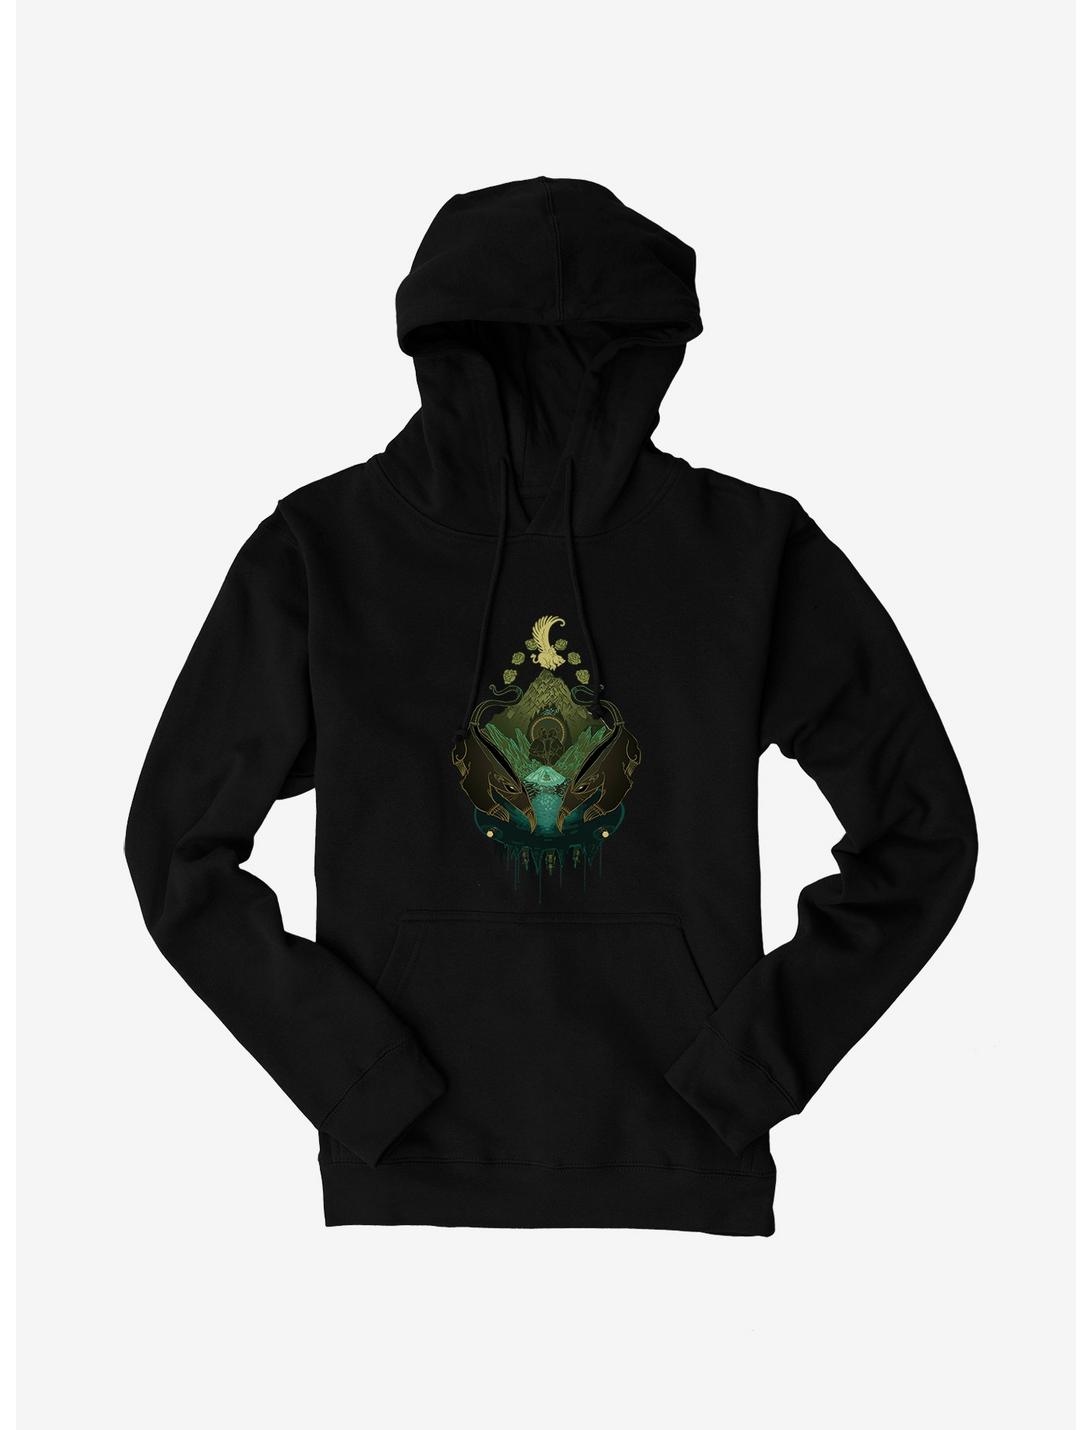 Plus Size Avatar: The Last Airbender Through The Earth Hoodie, , hi-res